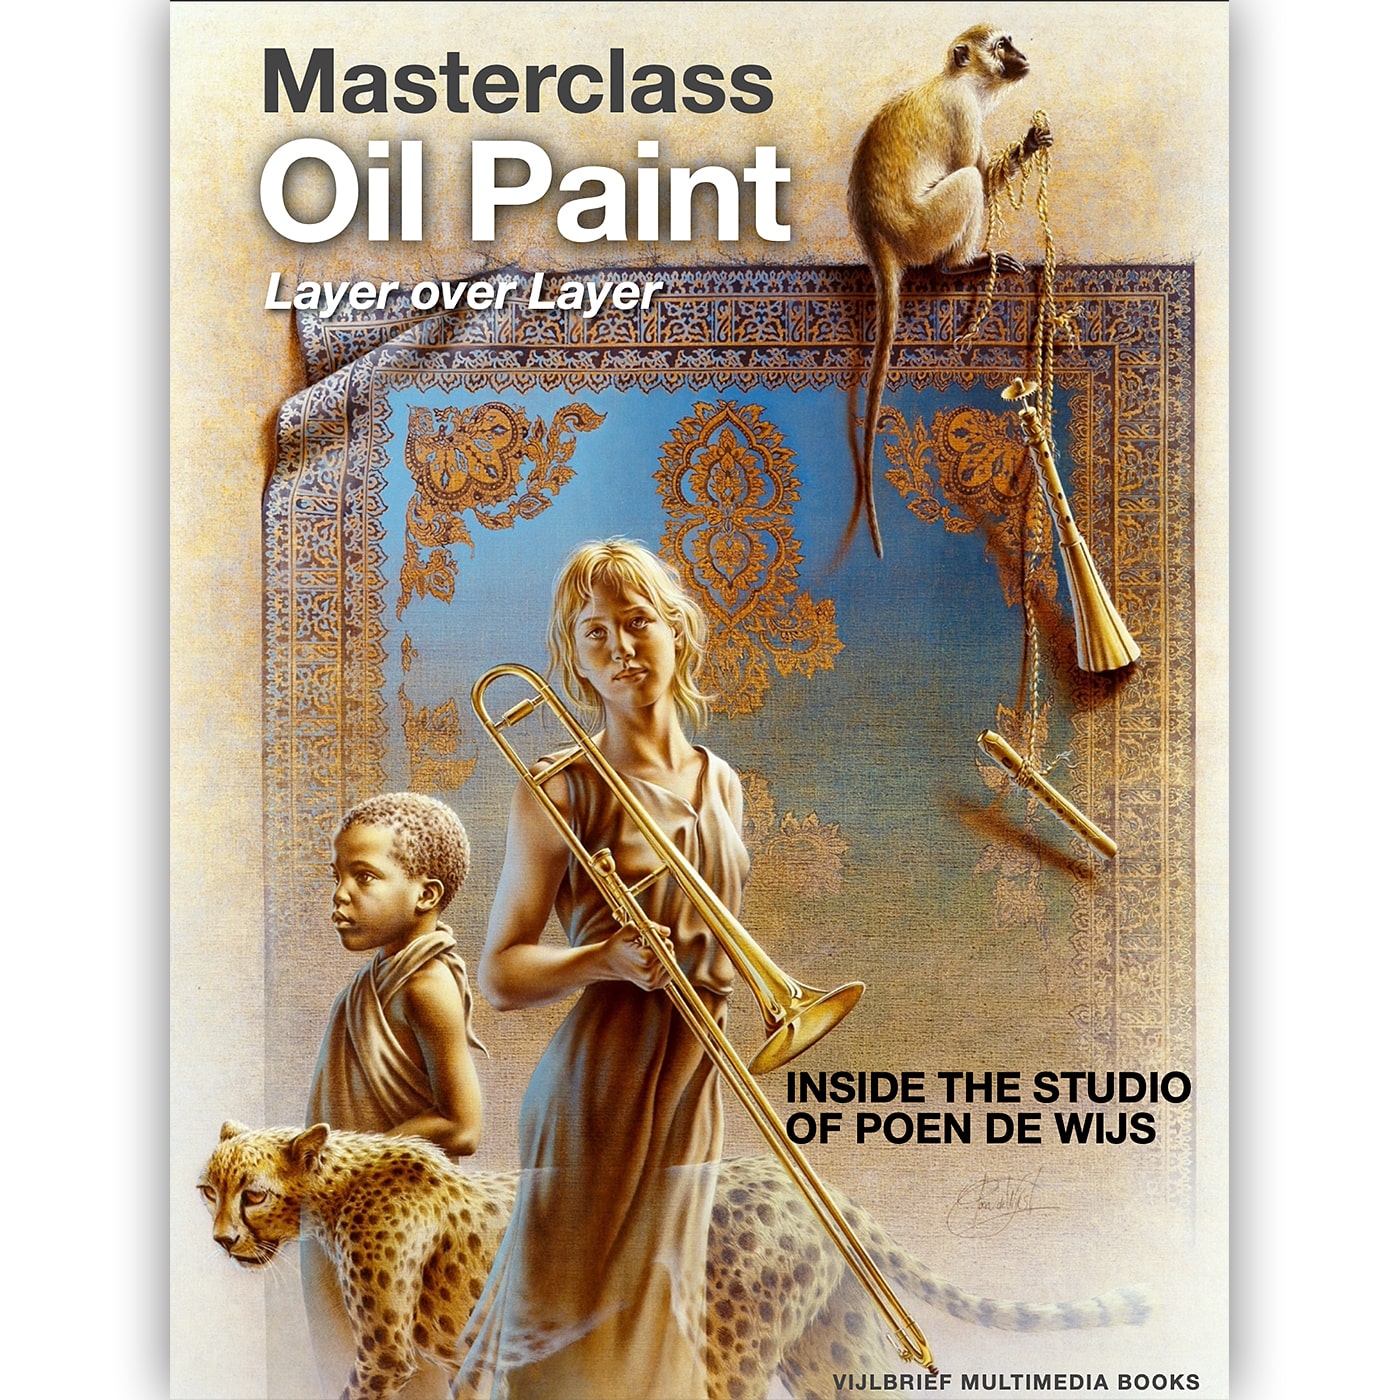 Painting Lessons in Oil painting Masterclass on video with study book by Poen de Wijs